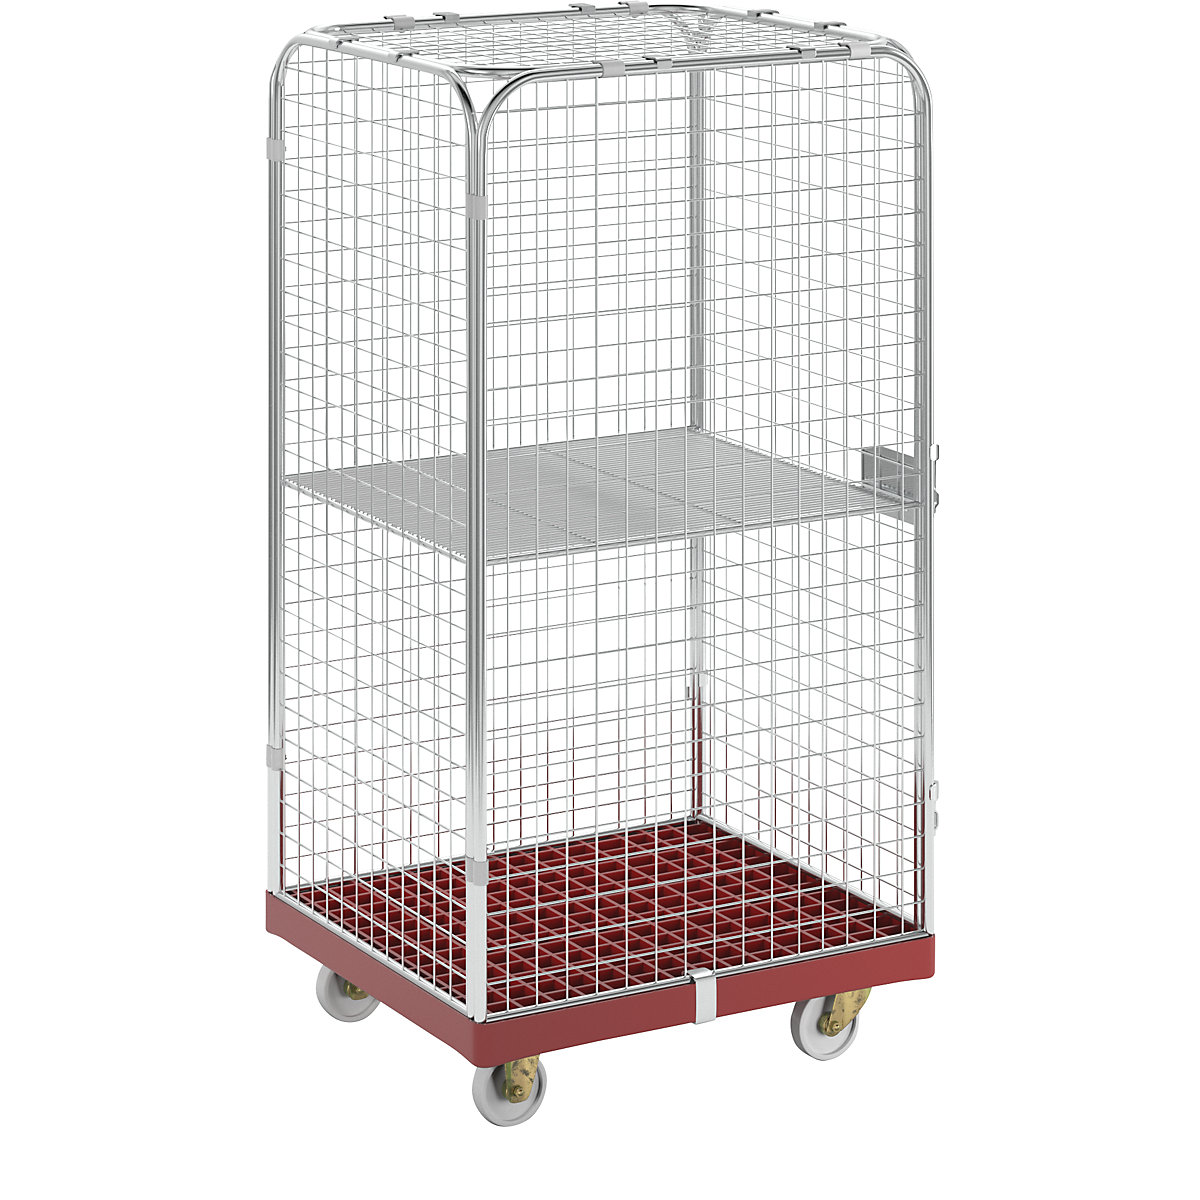 SAFE roll container, HxWxD 1550 x 720 x 810 mm, red transport dolly-11